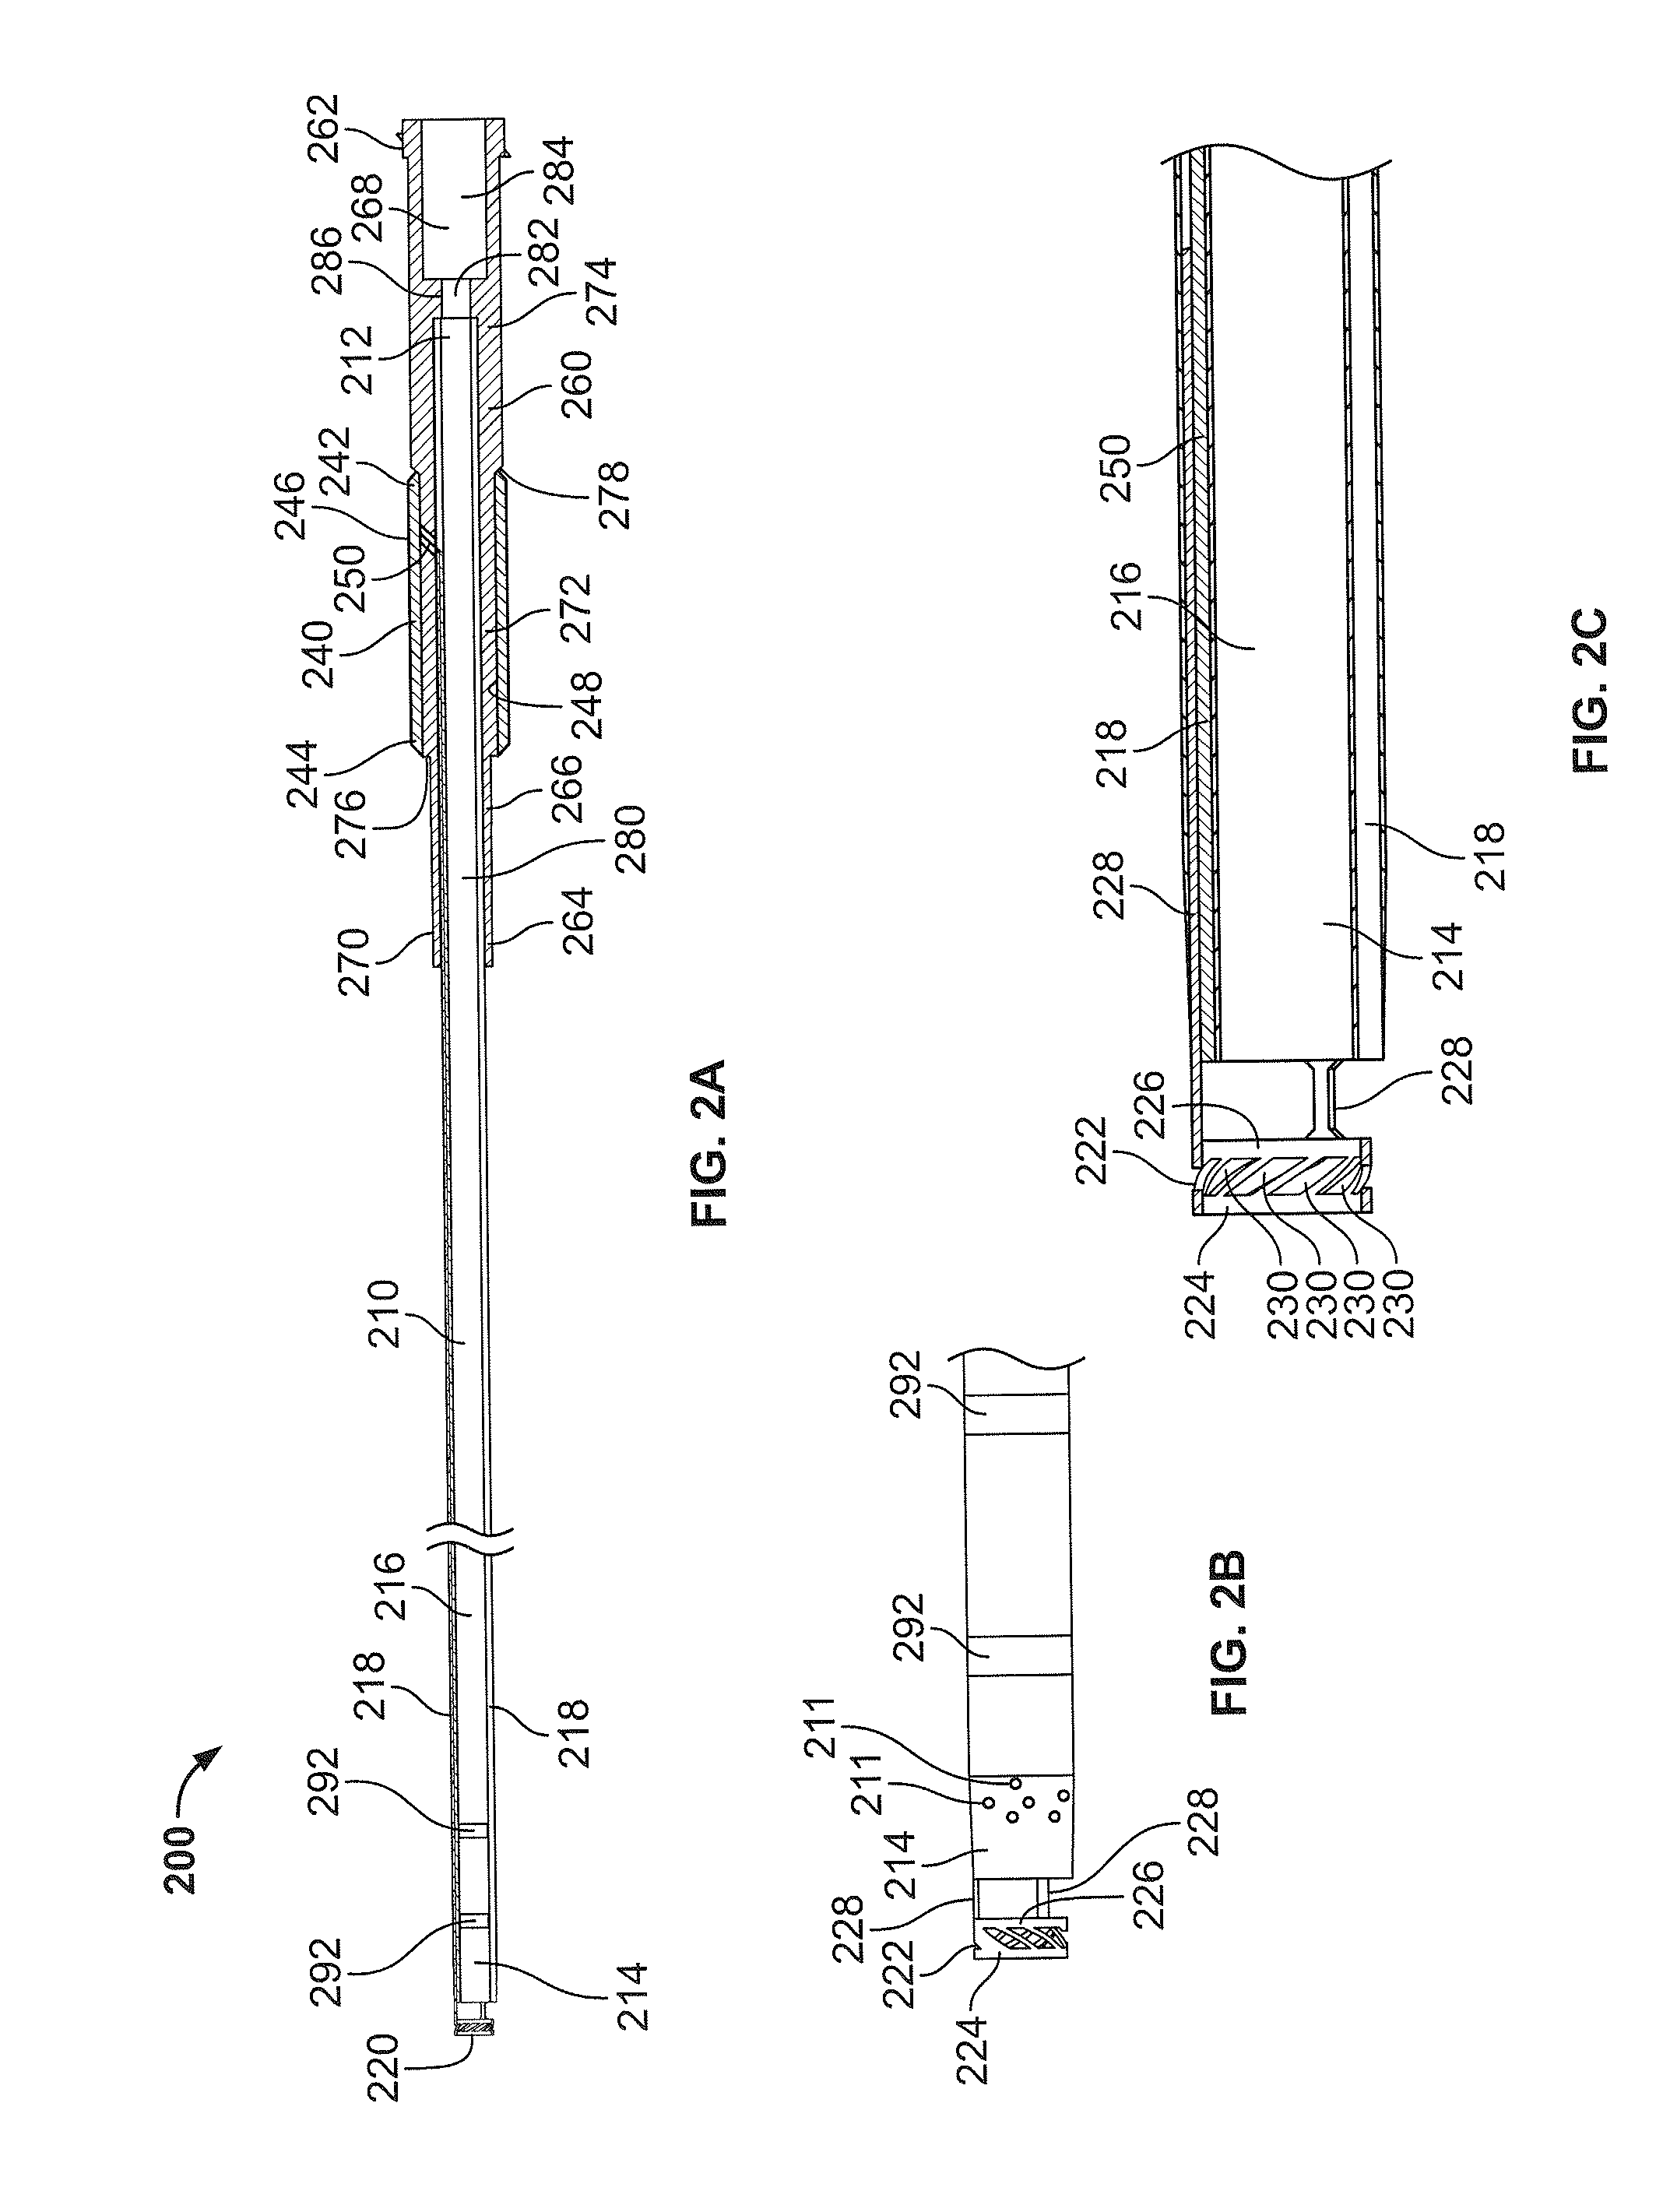 Bronchoscope-Compatible Catheter Provided with Electrosurgical Device